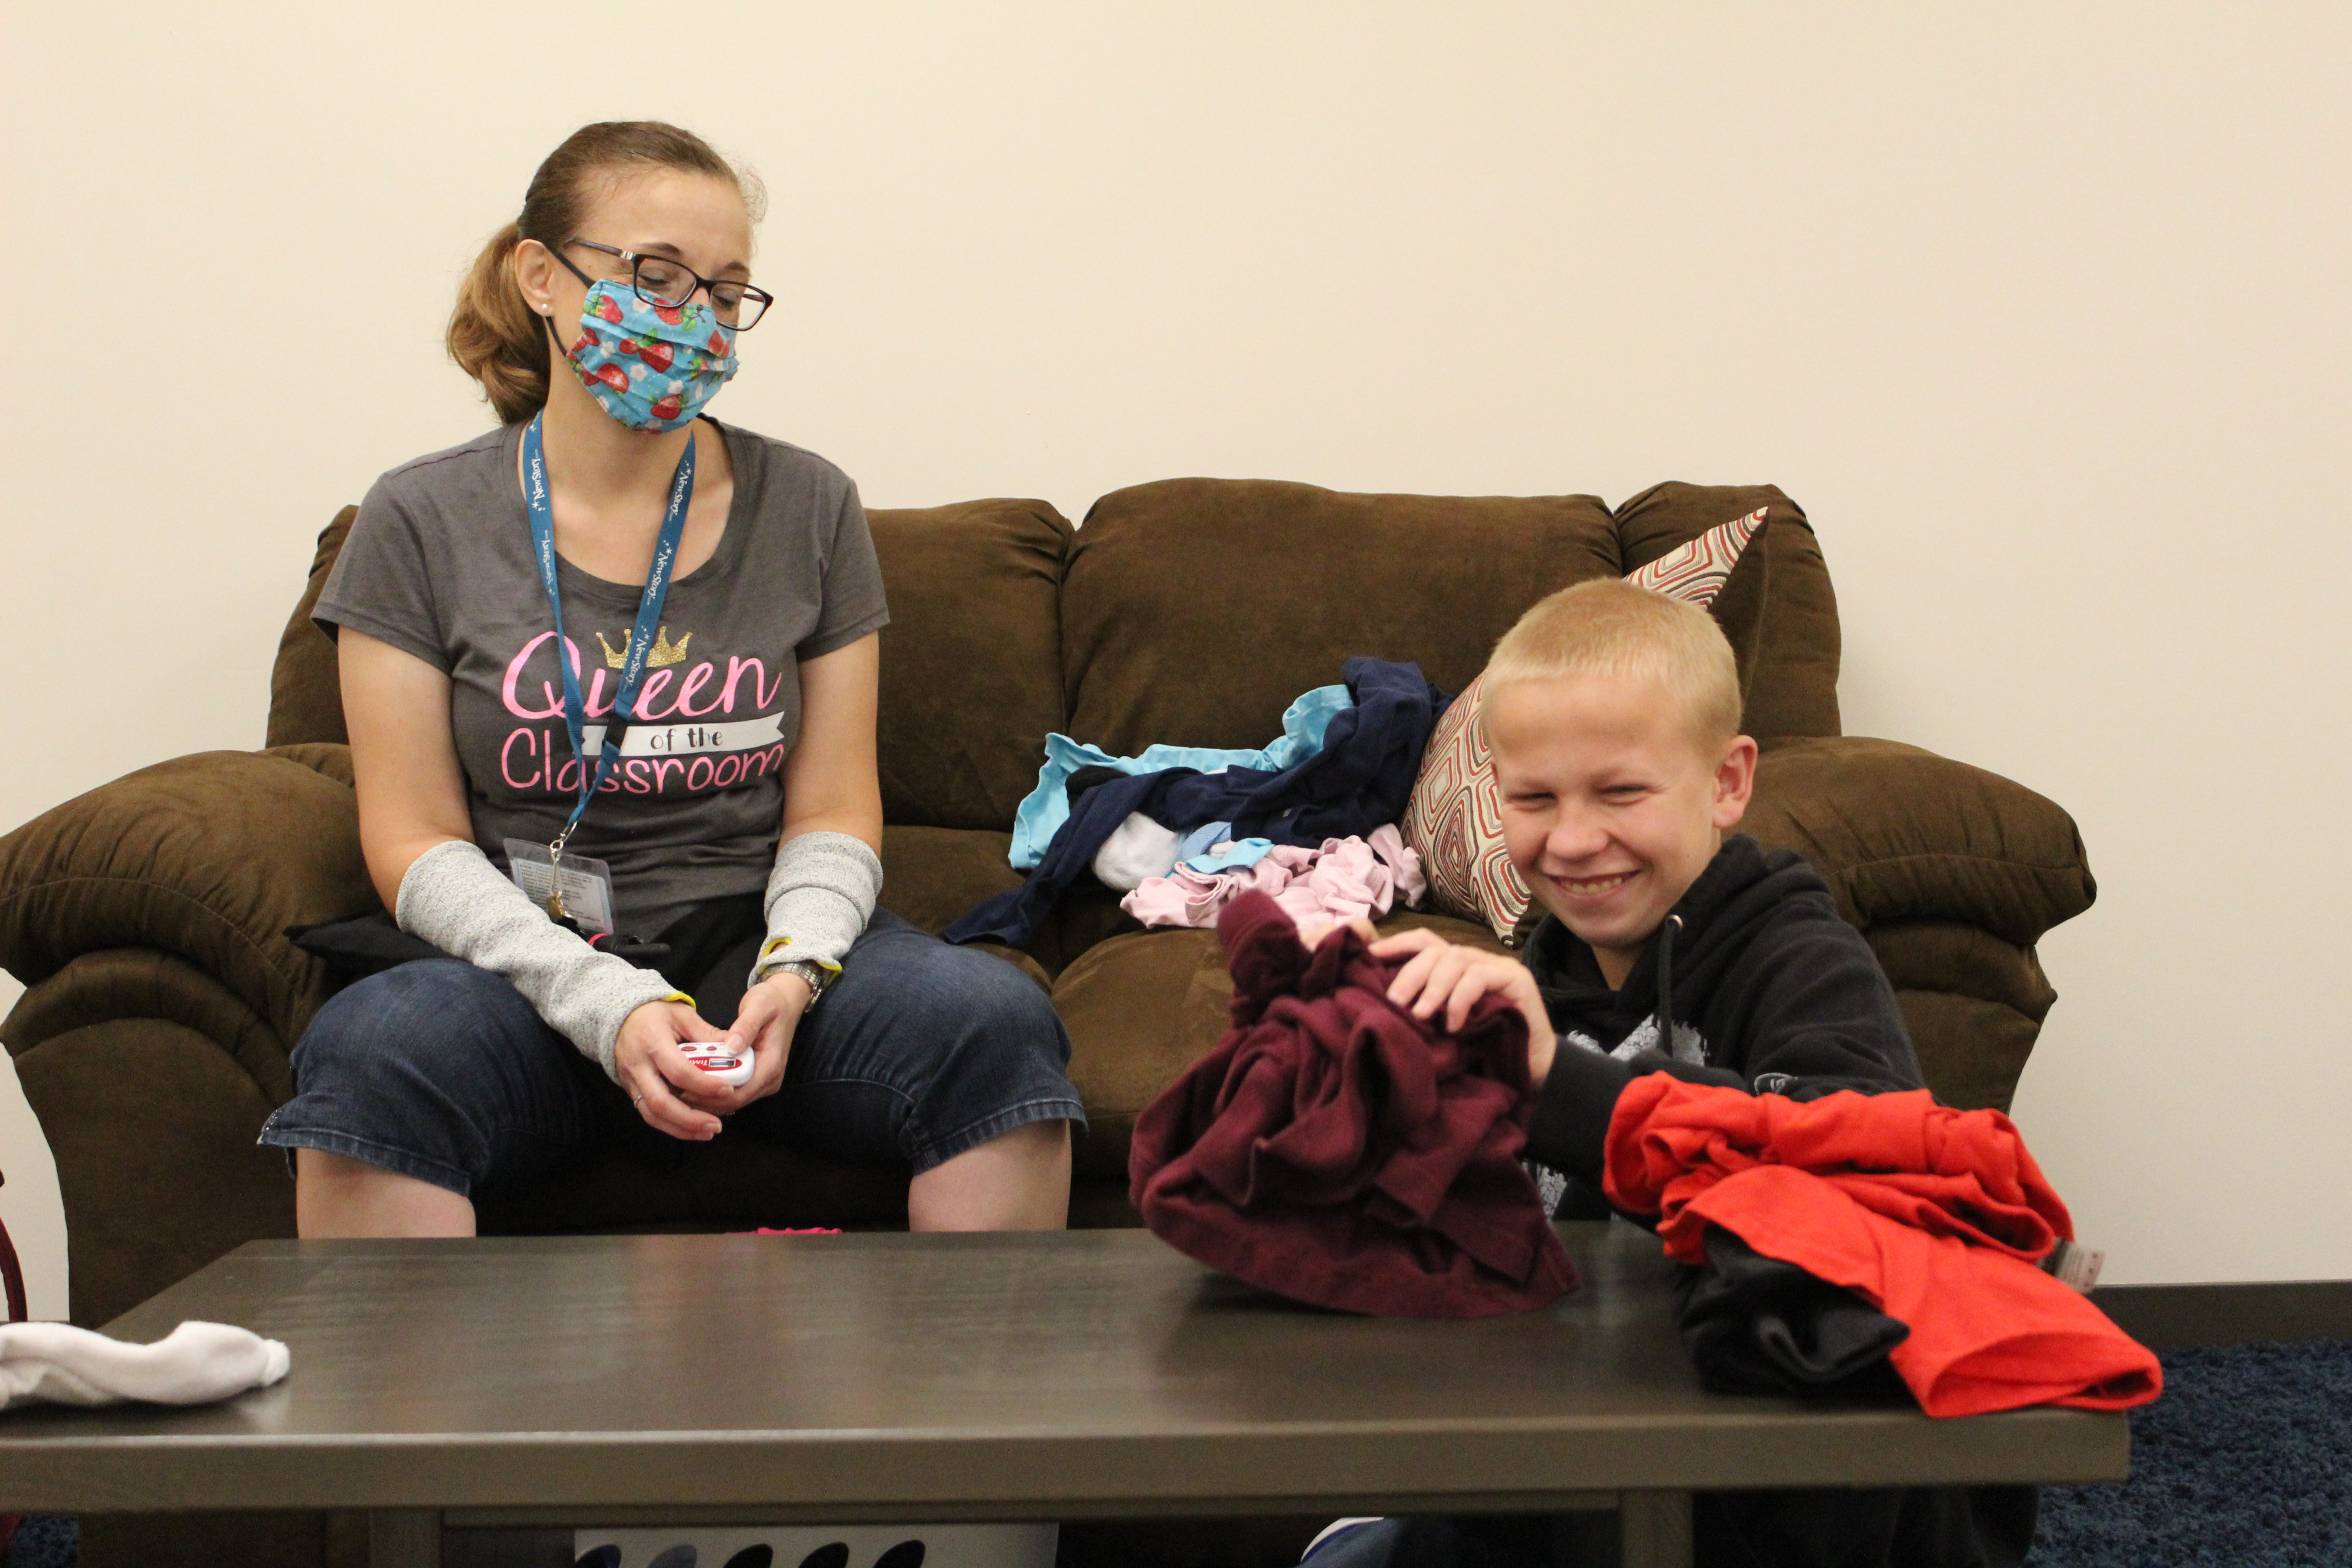 Special Education Student folds clothes in the Life Skills apartment. His Teacher, sitting on the couch, watches. The teacher is wearing a mask. 